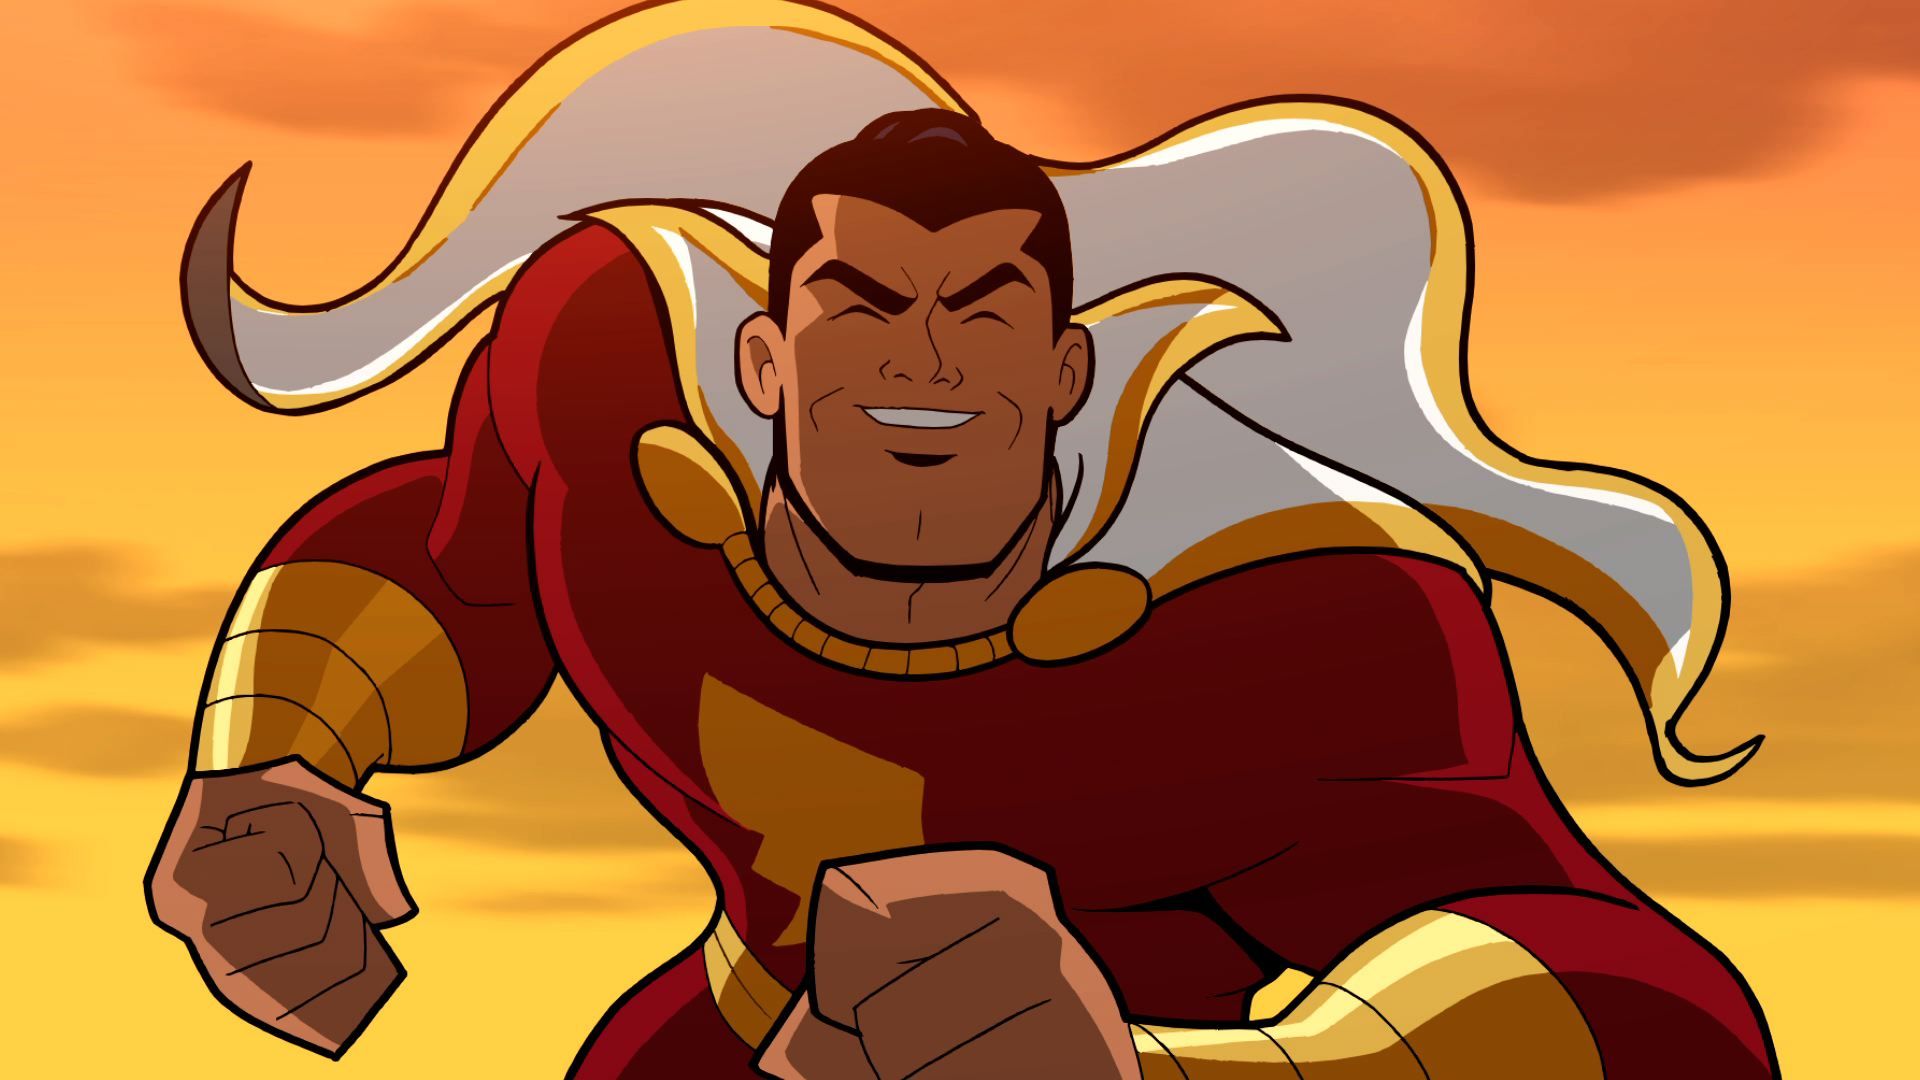 Shazam gets fast-tracked as the next DC Extended Universe movie